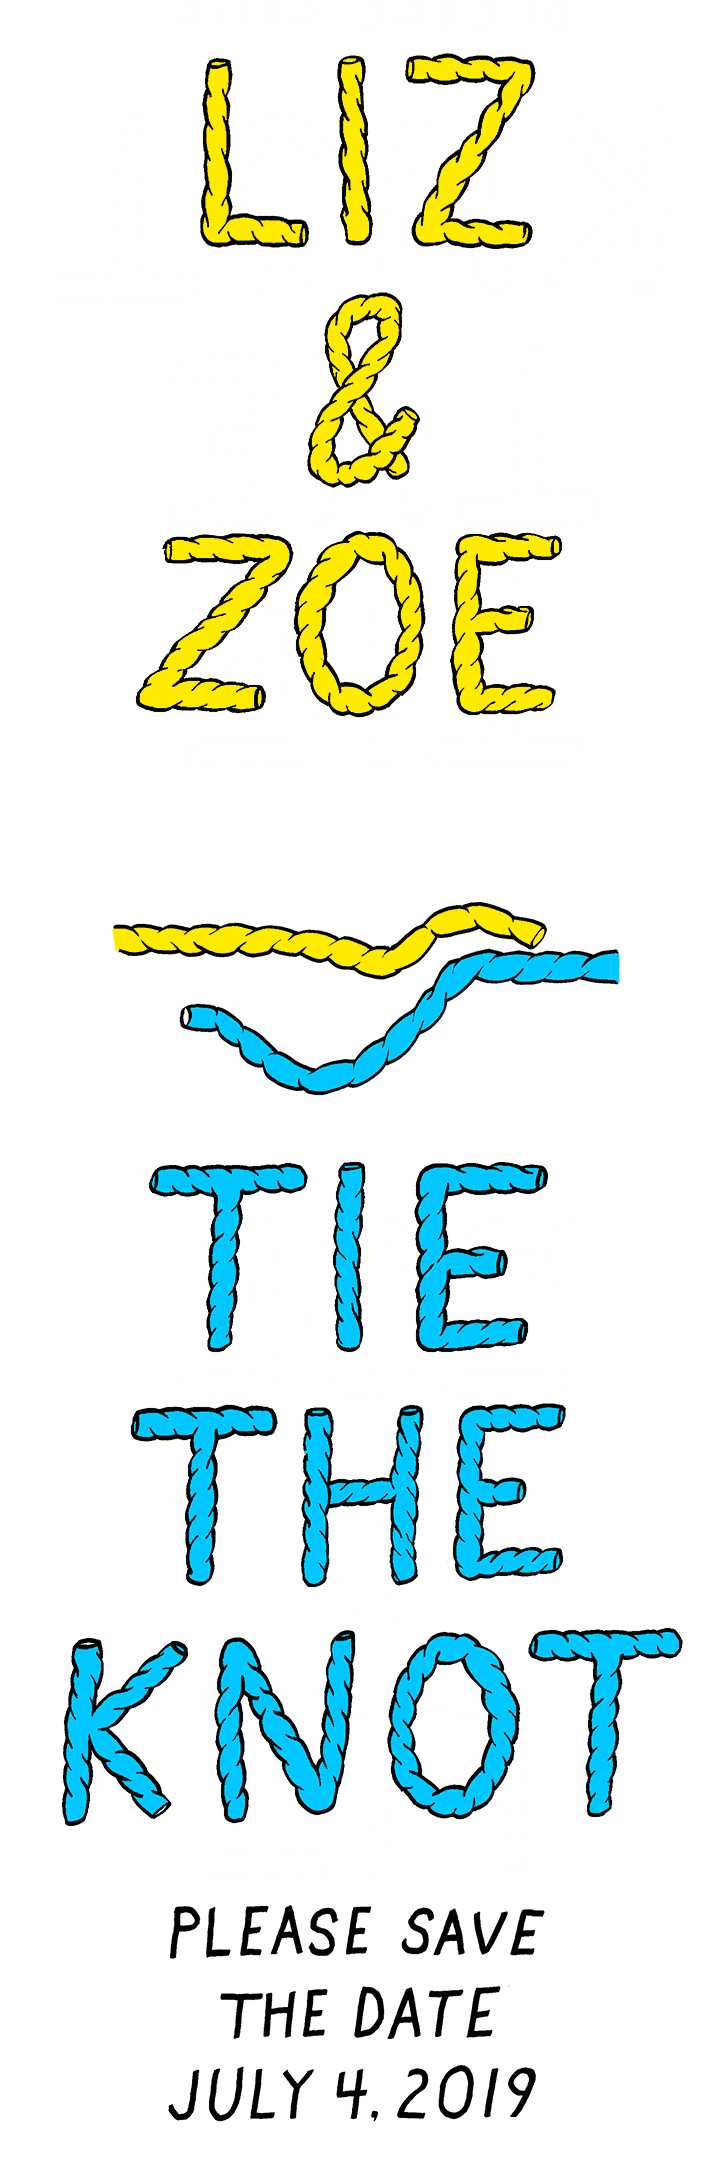 Tie the Knot